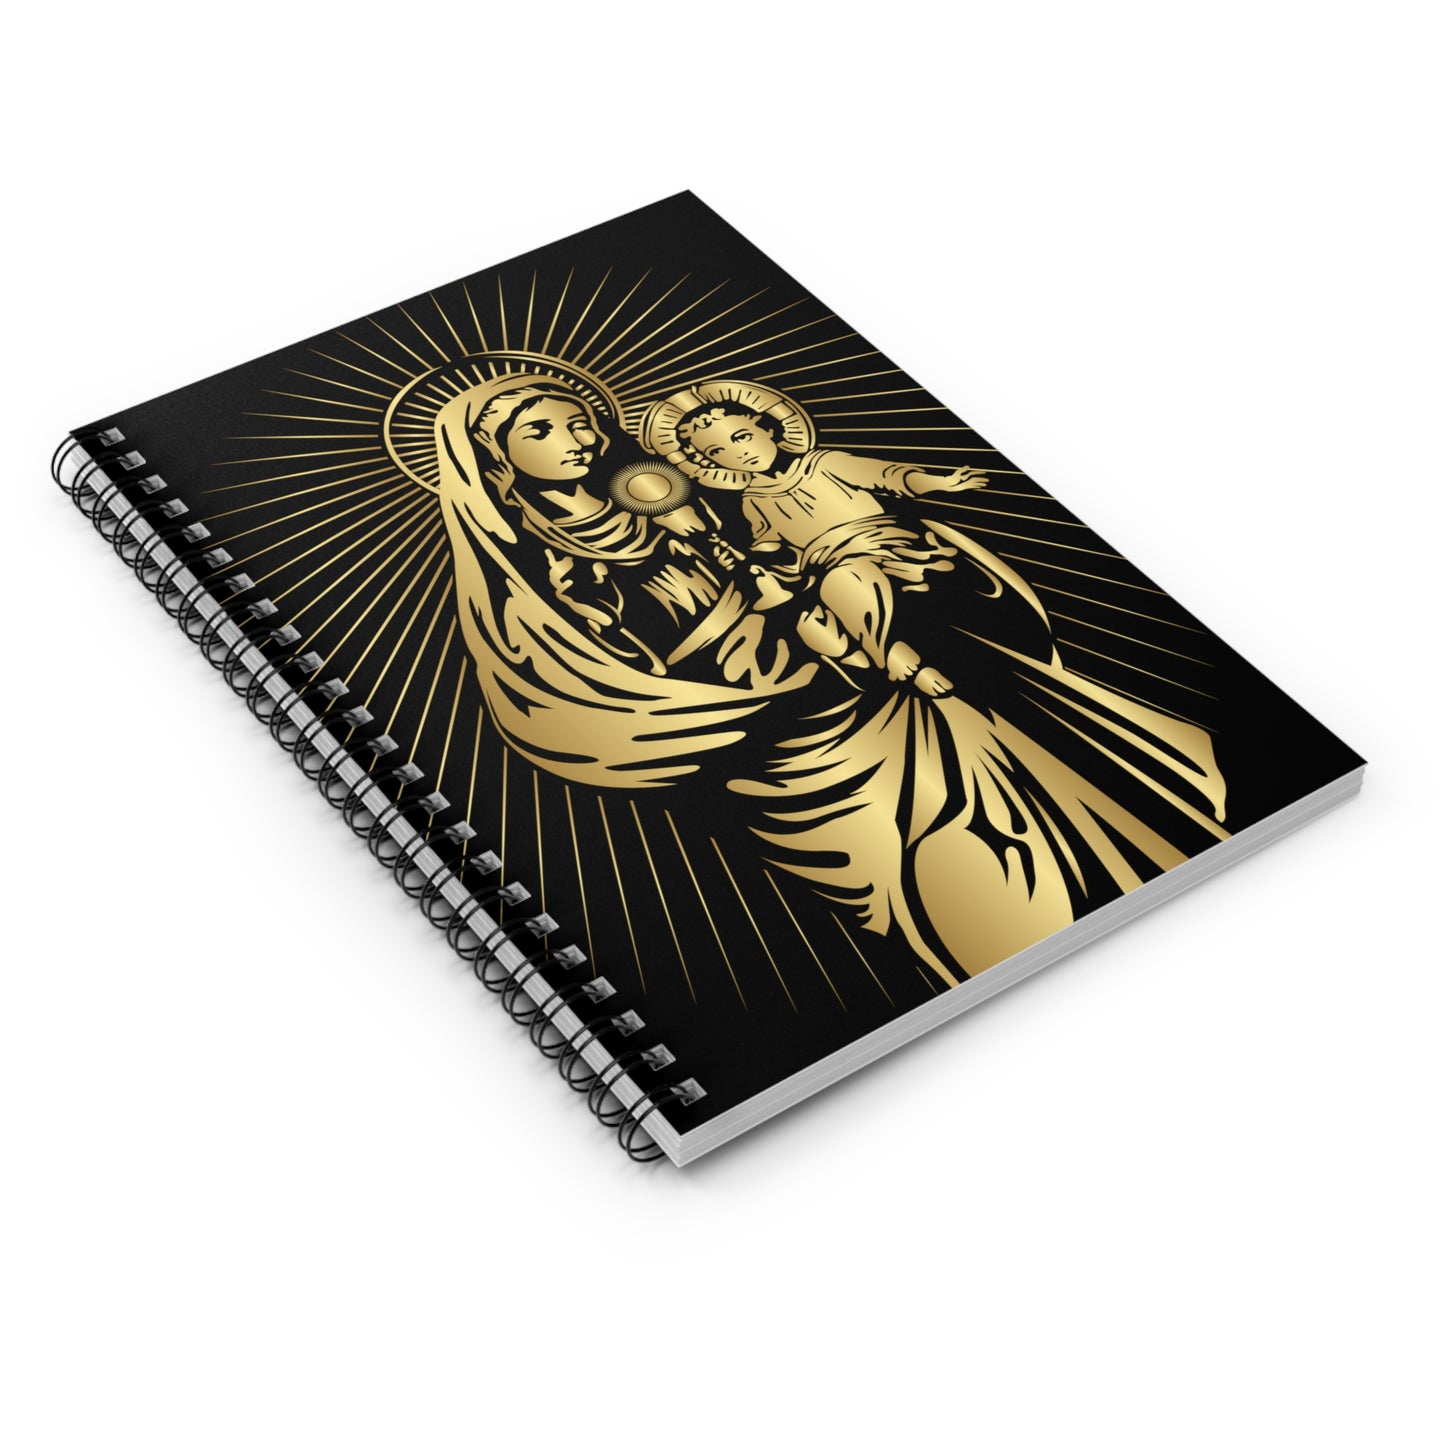 Mary Queen of Heaven and the Child Jesus Journal, Prayer journal, religious journal, Catholic notebook, Adoration diary, Catholic diary